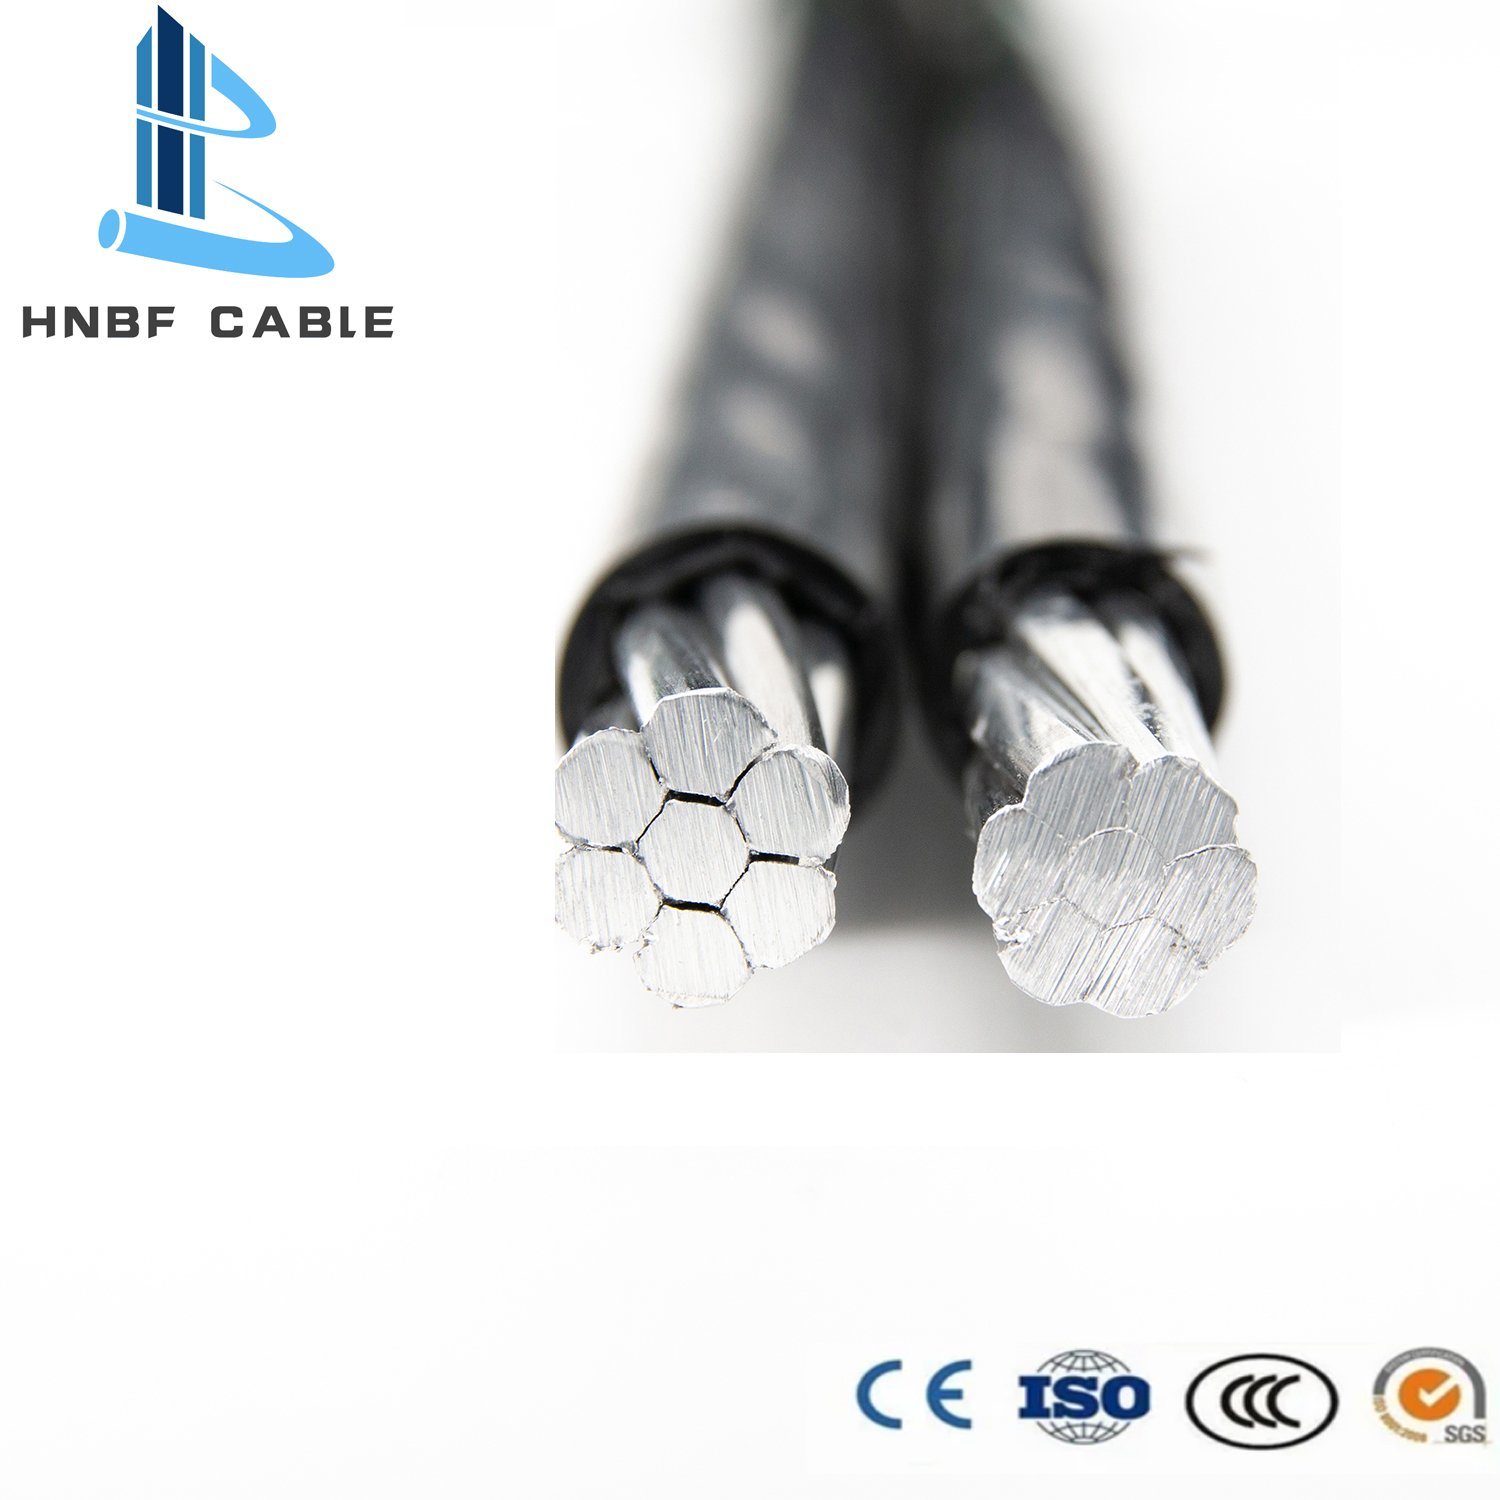 1*50+54.6 ABC Cable Aluminium Conductor XLPE/PE/PVC Insulated Electric Wire NFC Standard